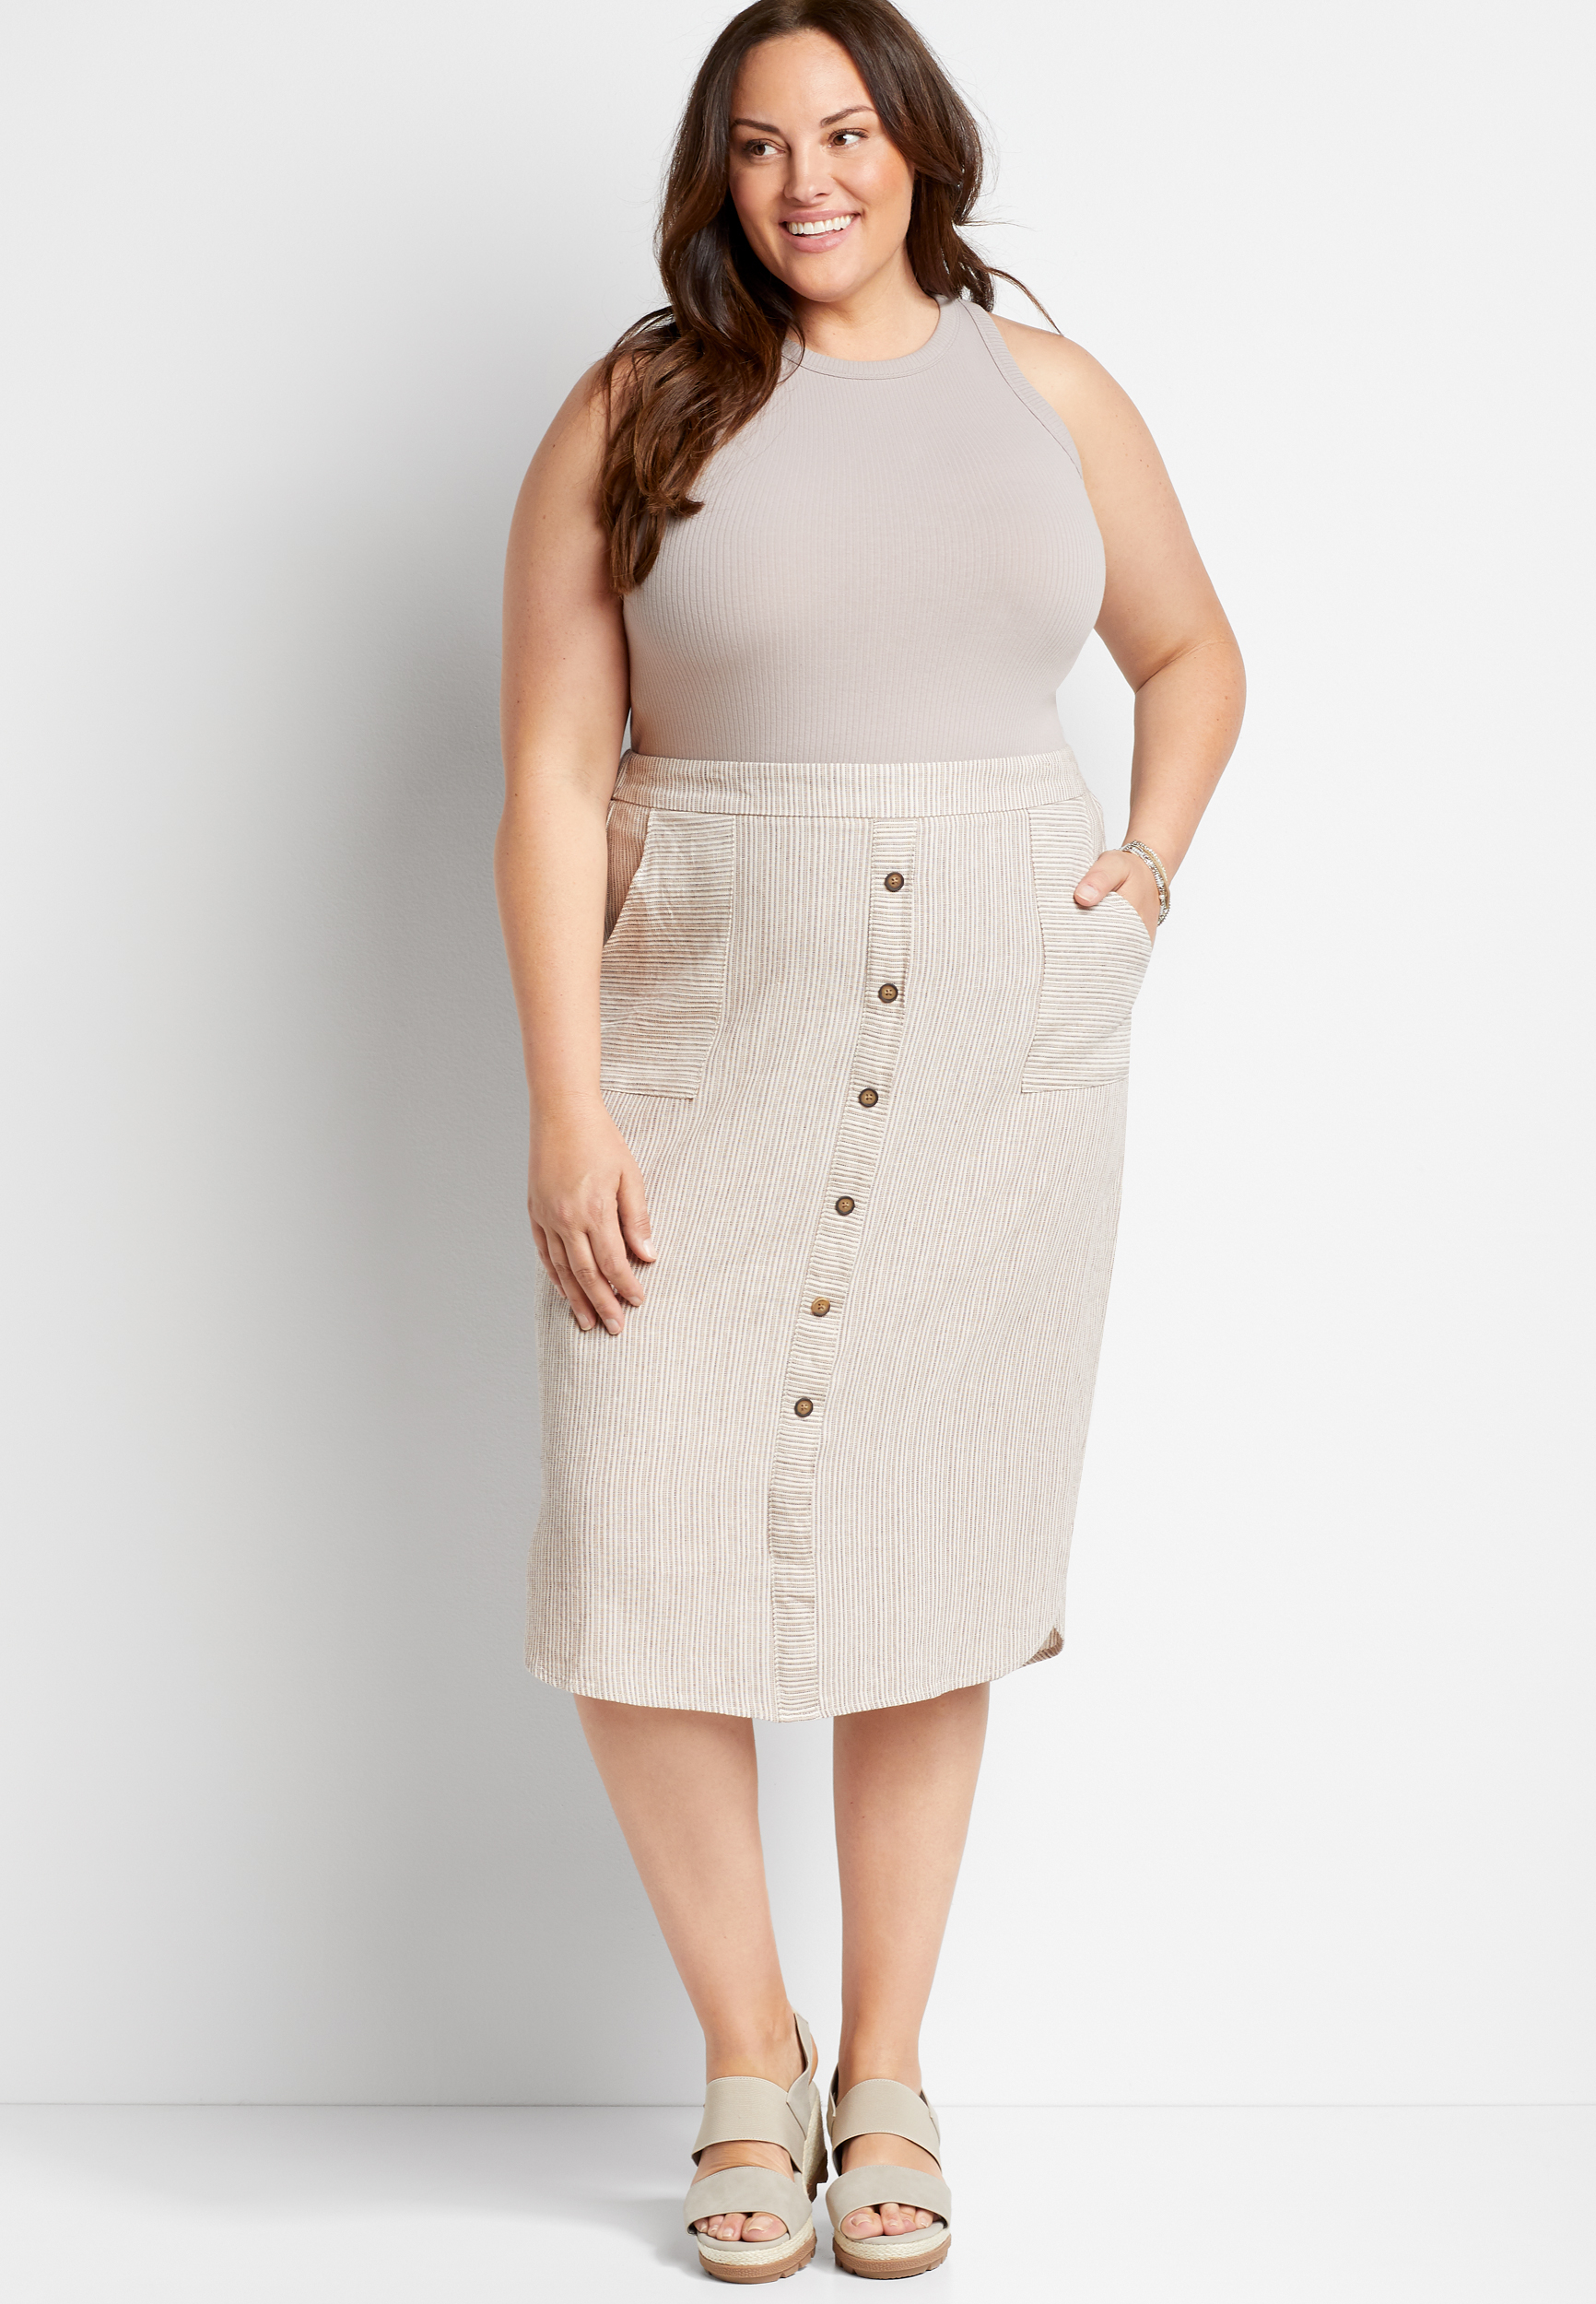 Plus Size Skirts | maurices